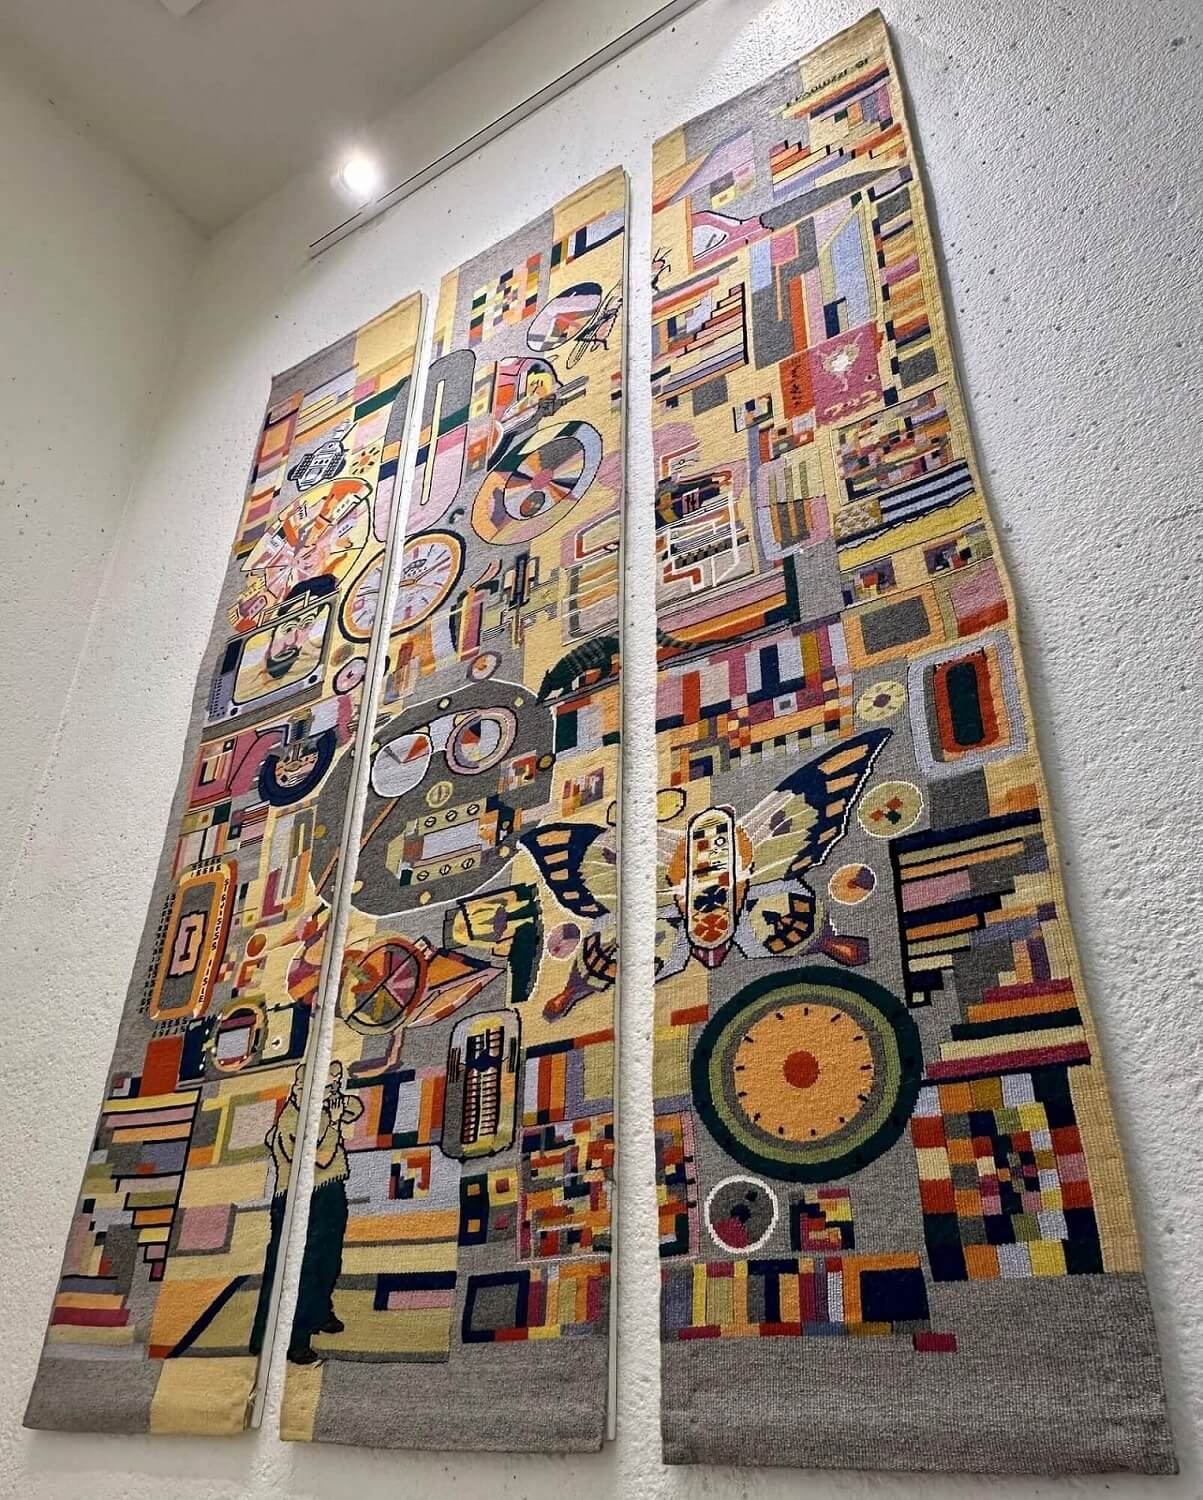 The tapestry 'A perspective on innovation', 1981 by Eduardo Paolozzi